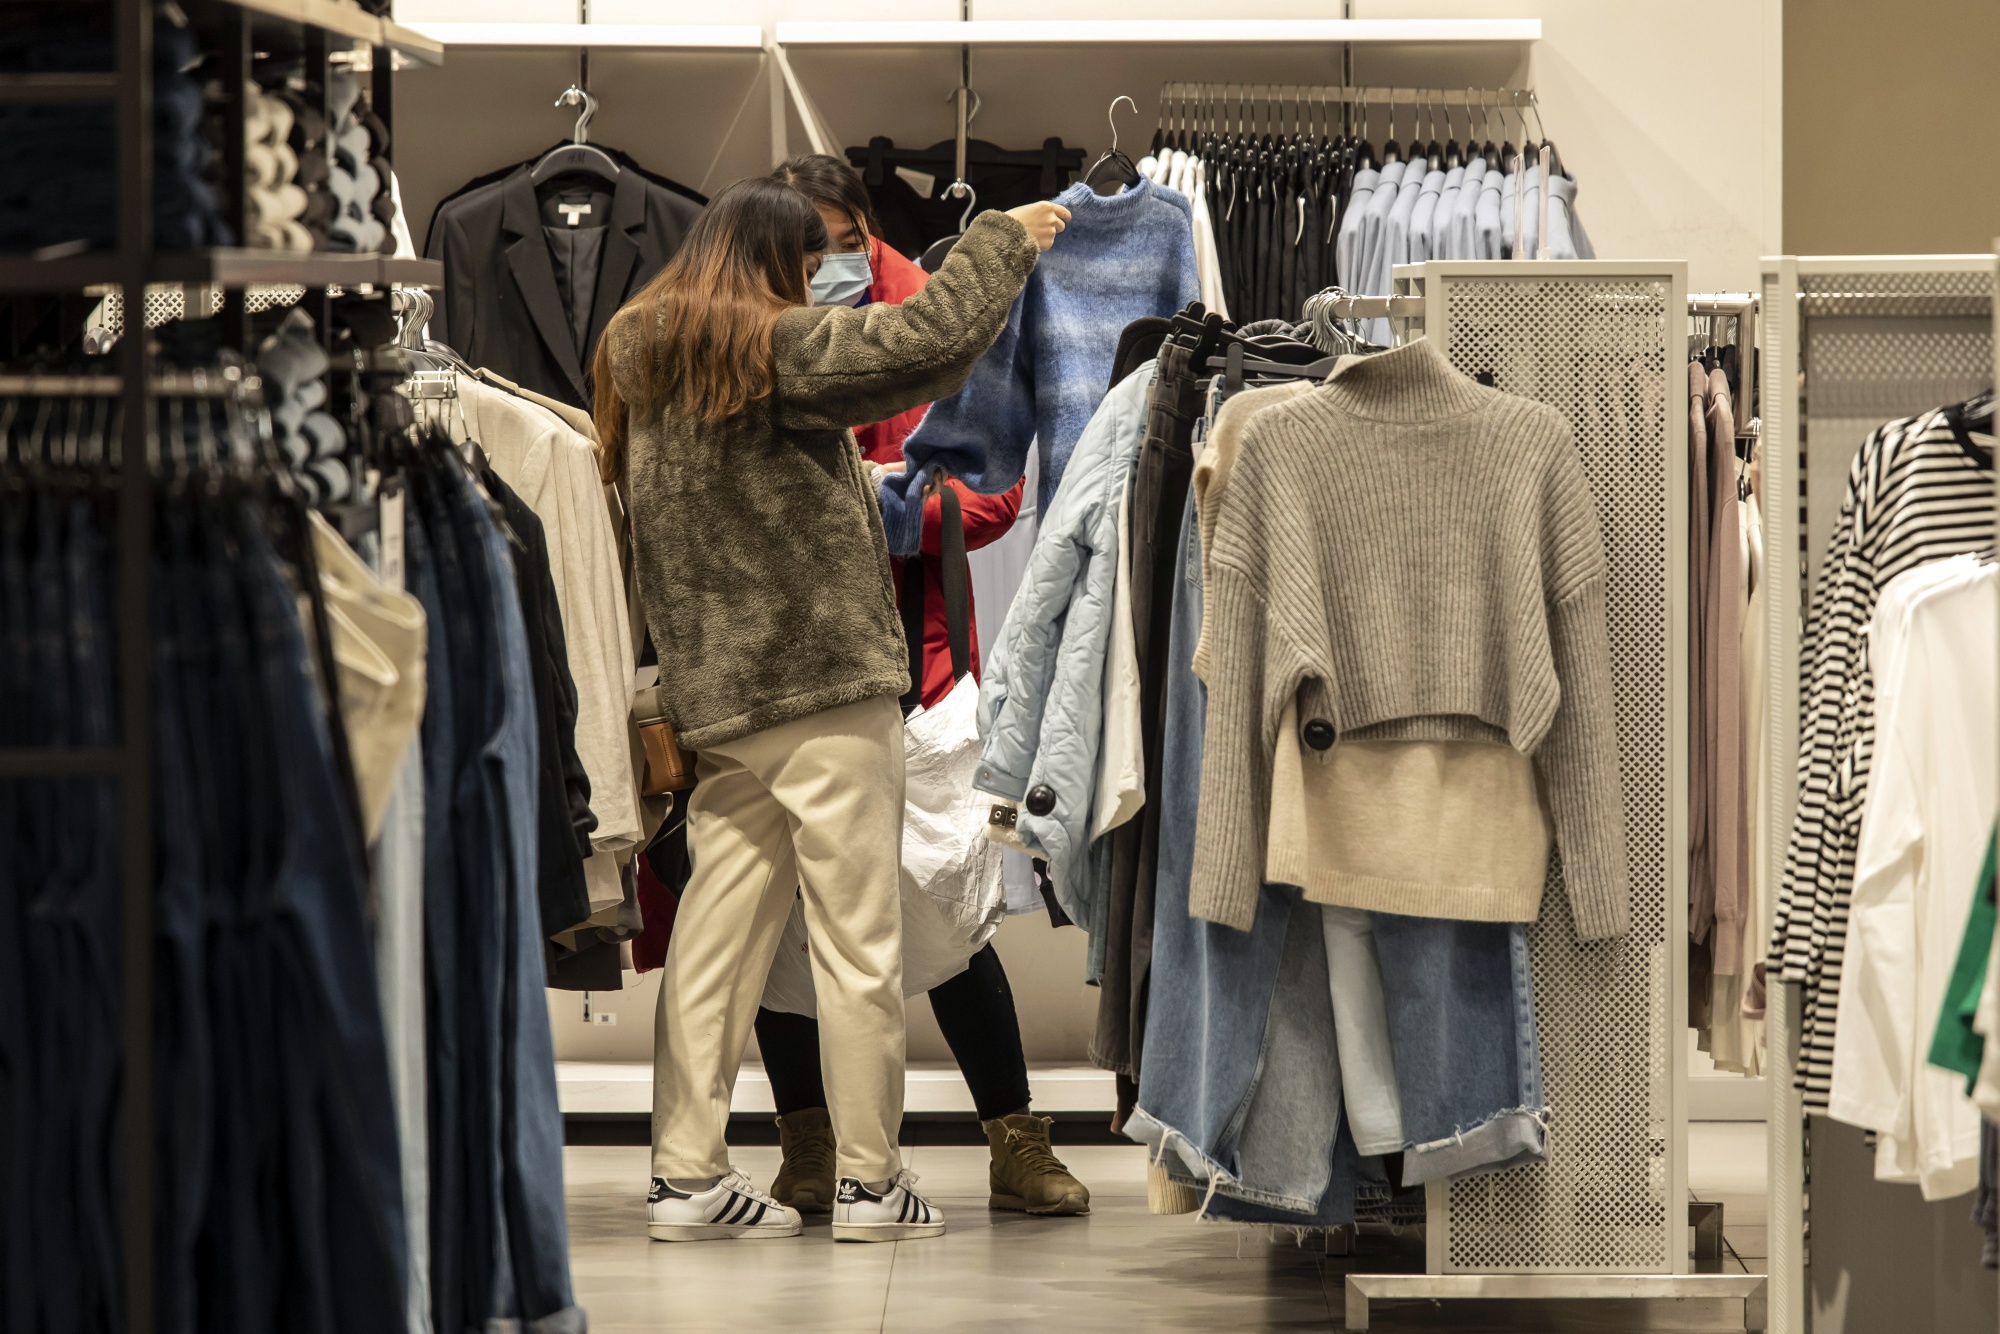 H&M Sales Growth Accelerates as Retailer Reduces Markdowns - Bloomberg